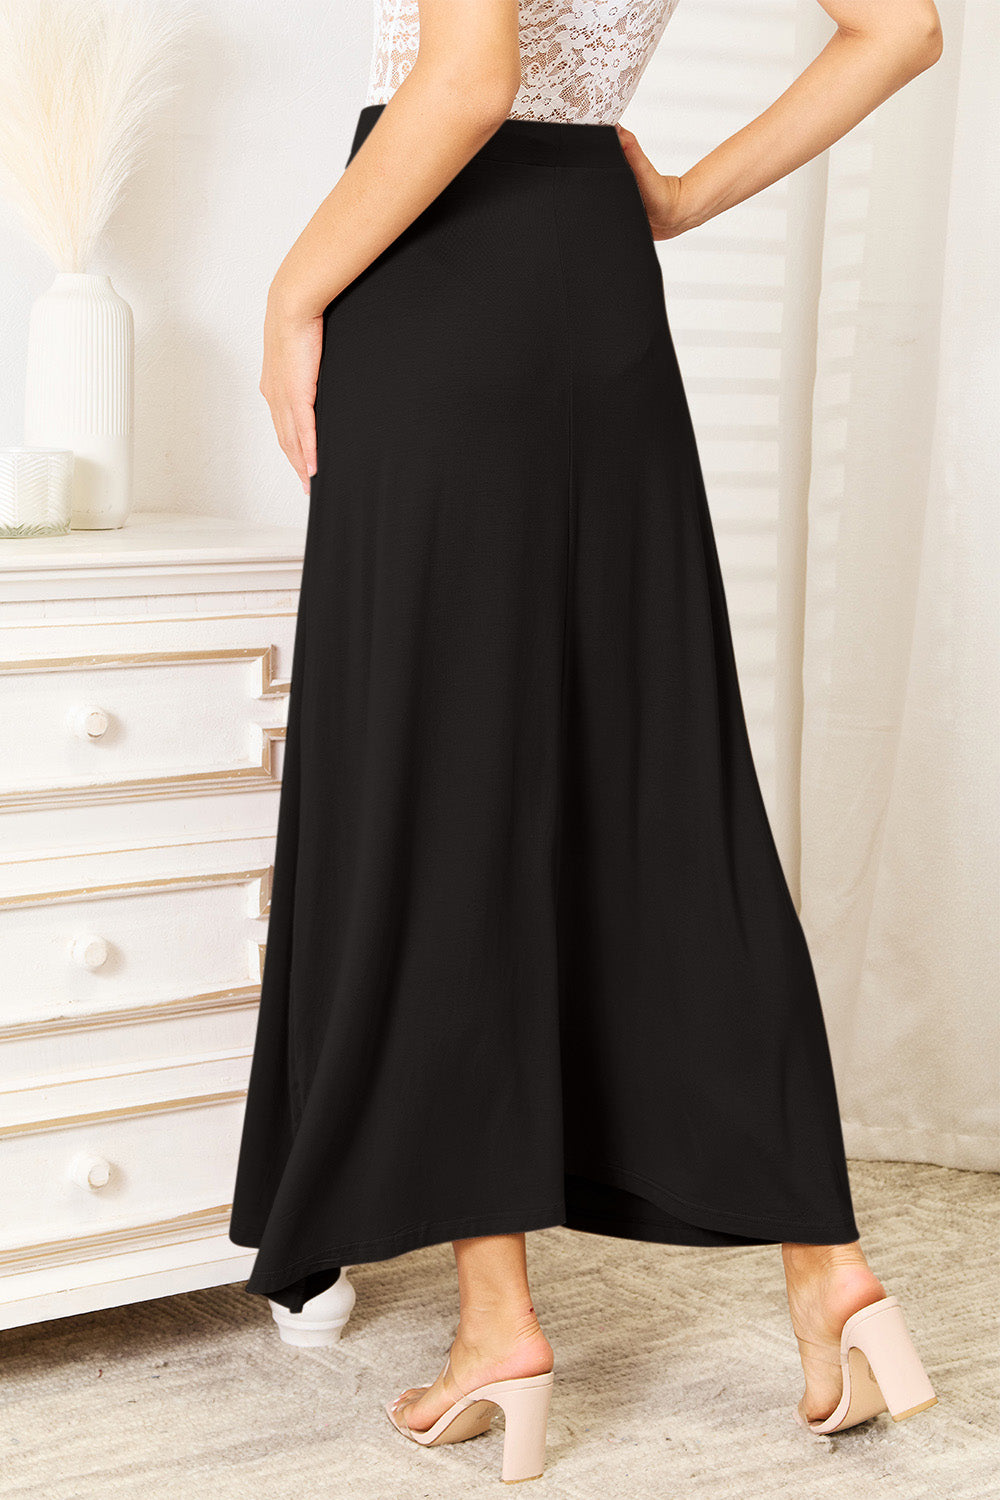 Double Take Full Size Soft Rayon Drawstring Waist Maxi Skirt Rayon [ click for additional color options]